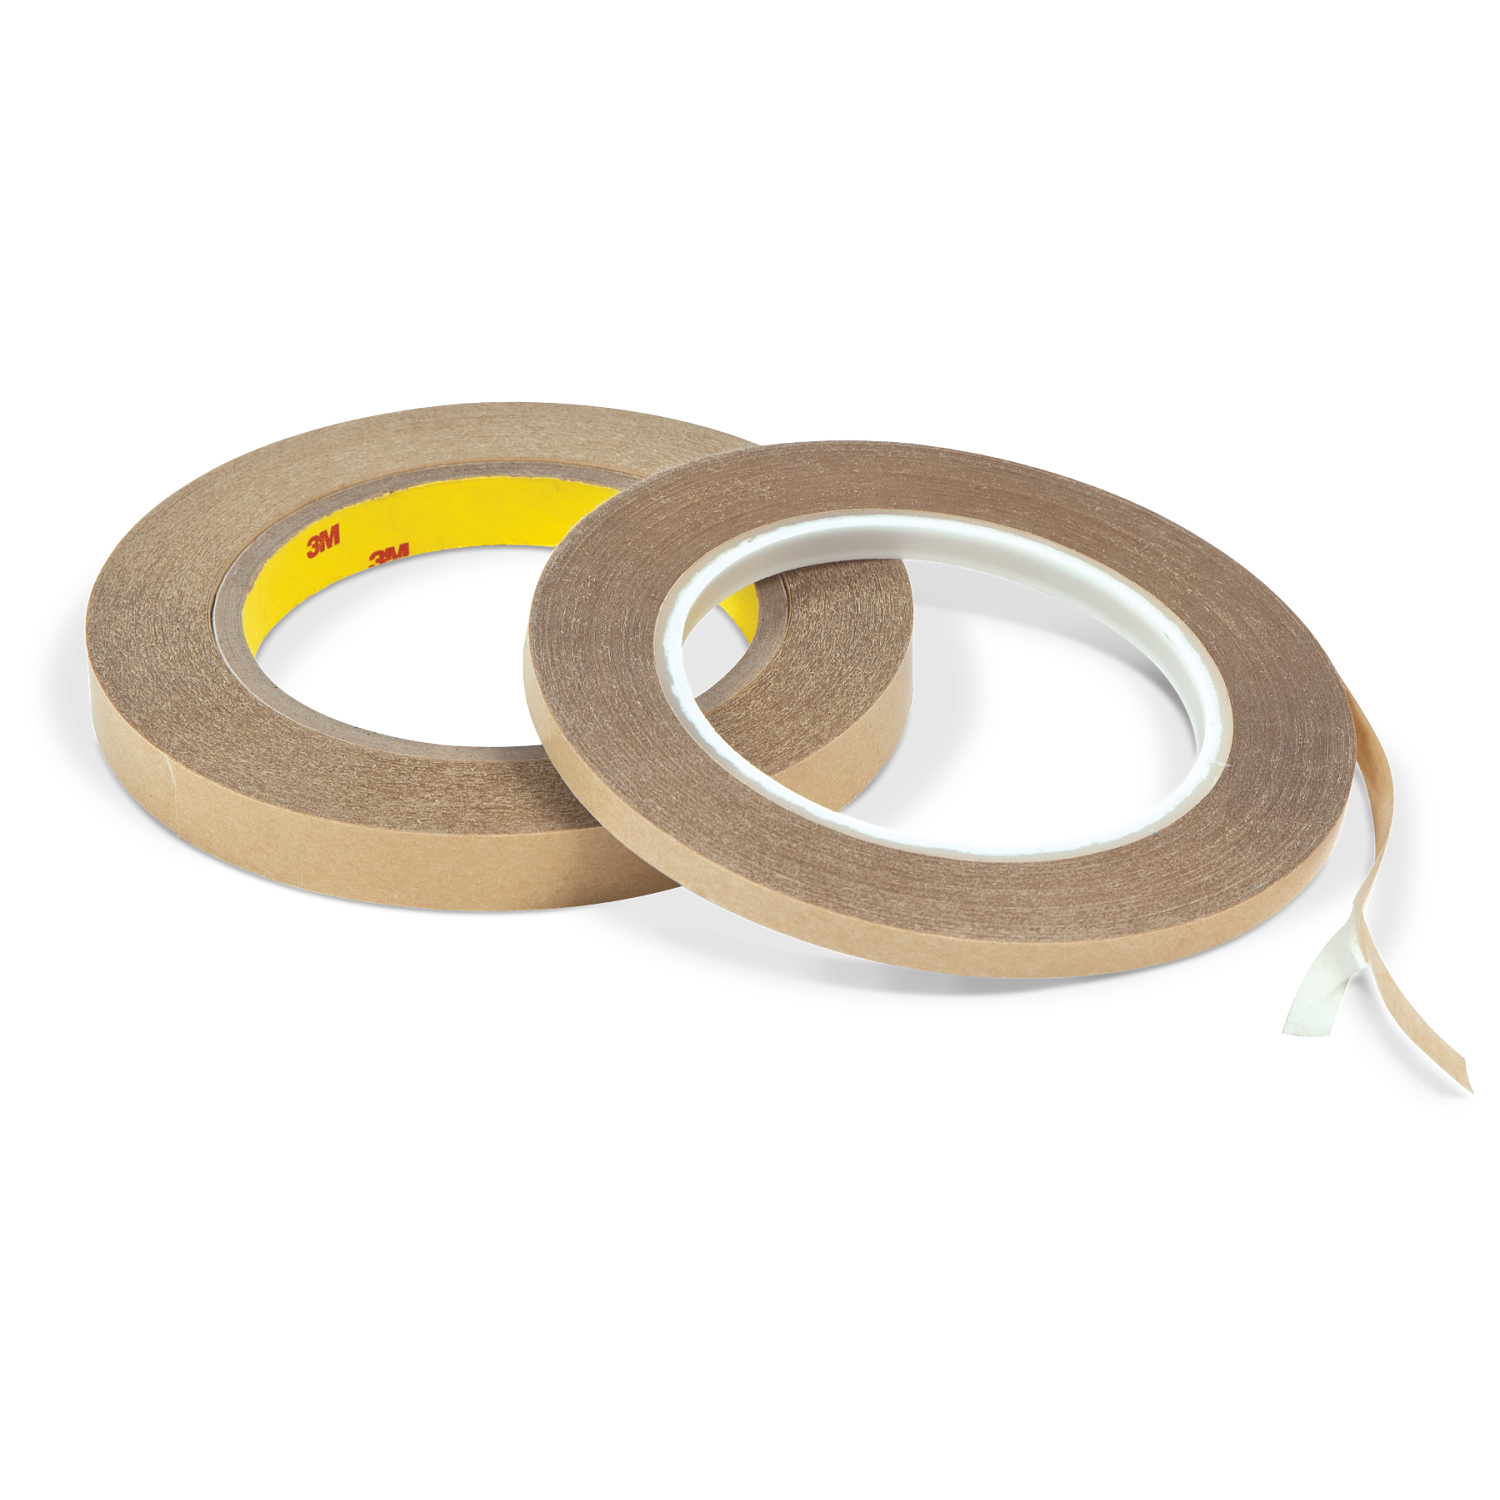 3M™ 415 Polyester Double-Sided Tape (36 yds.)